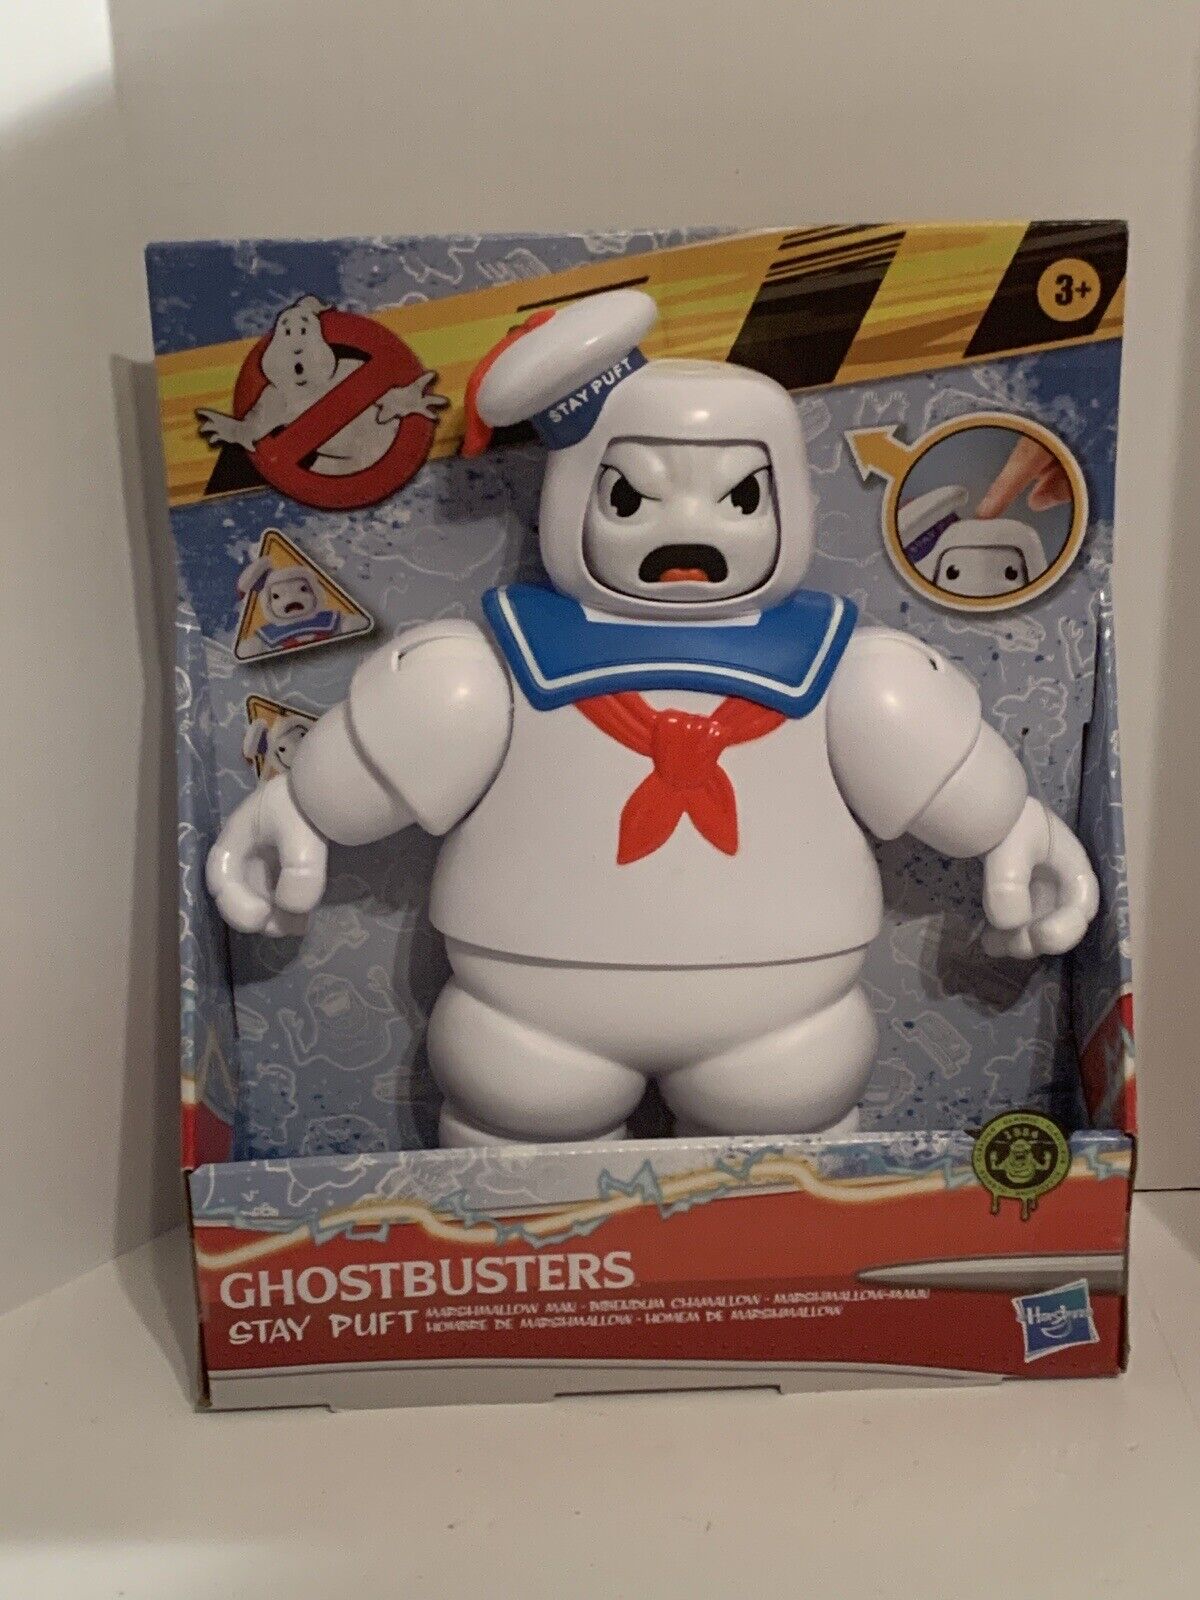 Hasbro Ghostbusters Stay Puft Marshmallow Man Figure Changing Face Expression